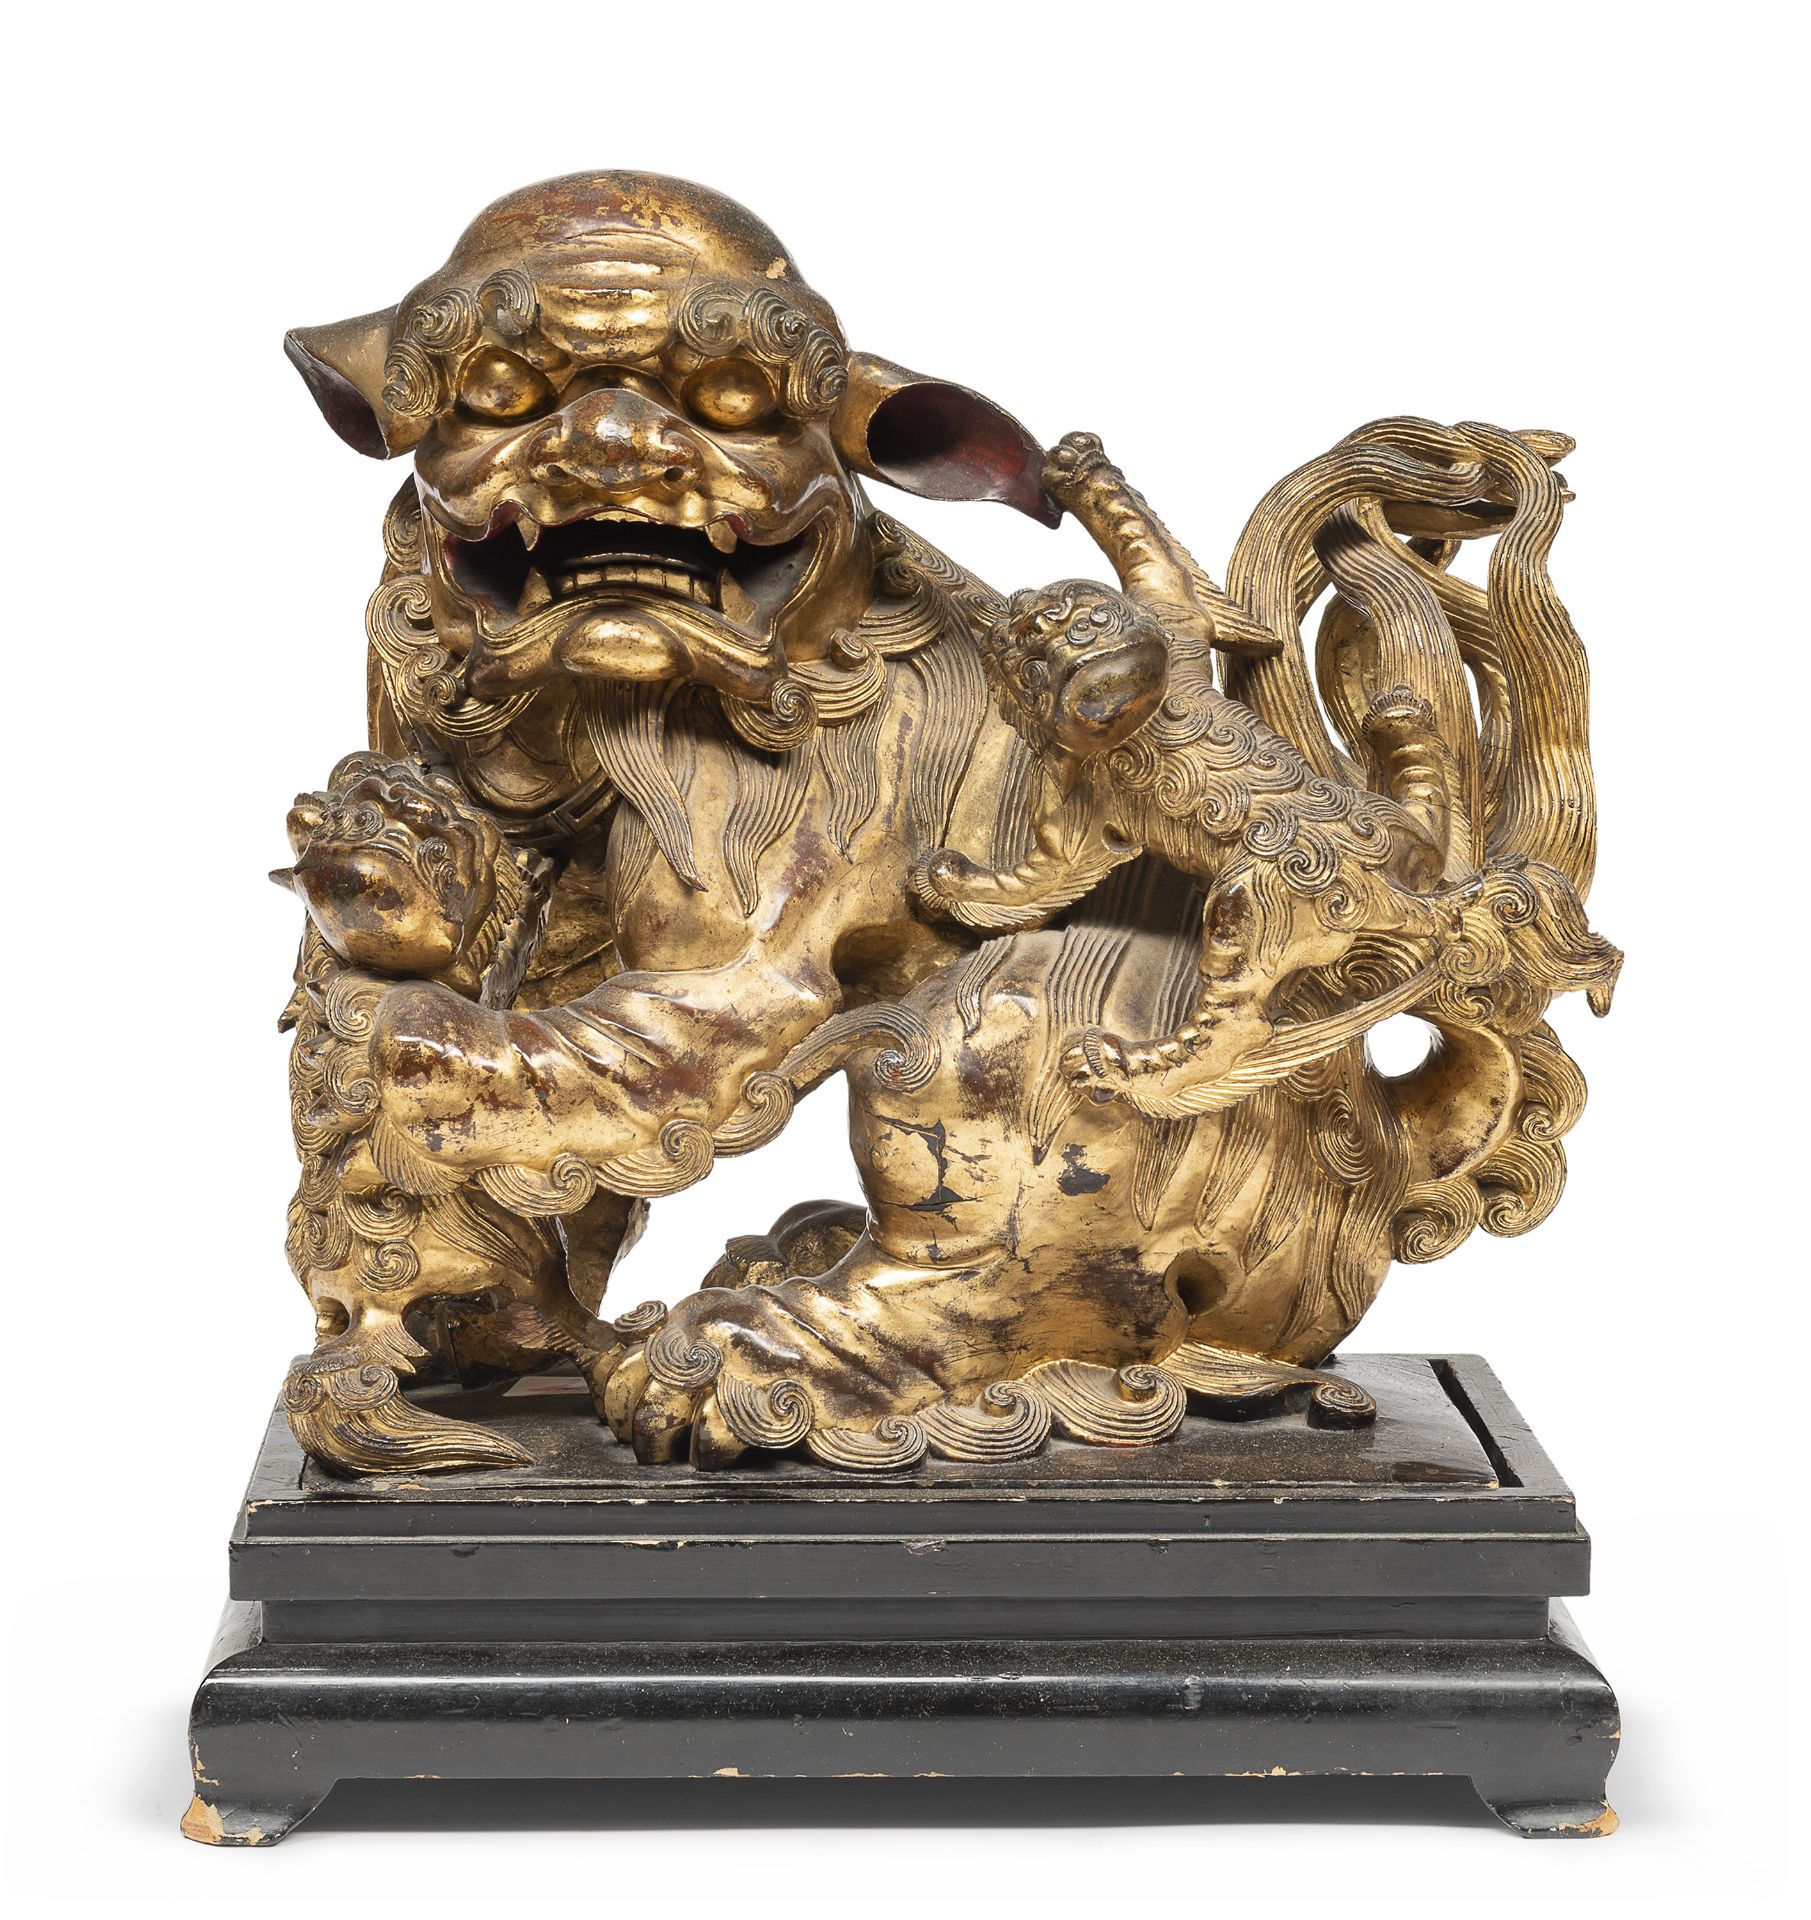 A RARE LACQUER AND GILT ON WOOD GROUP DEPICTINMG THREE SHISHI CHINA EARLY 20TH CENTURY